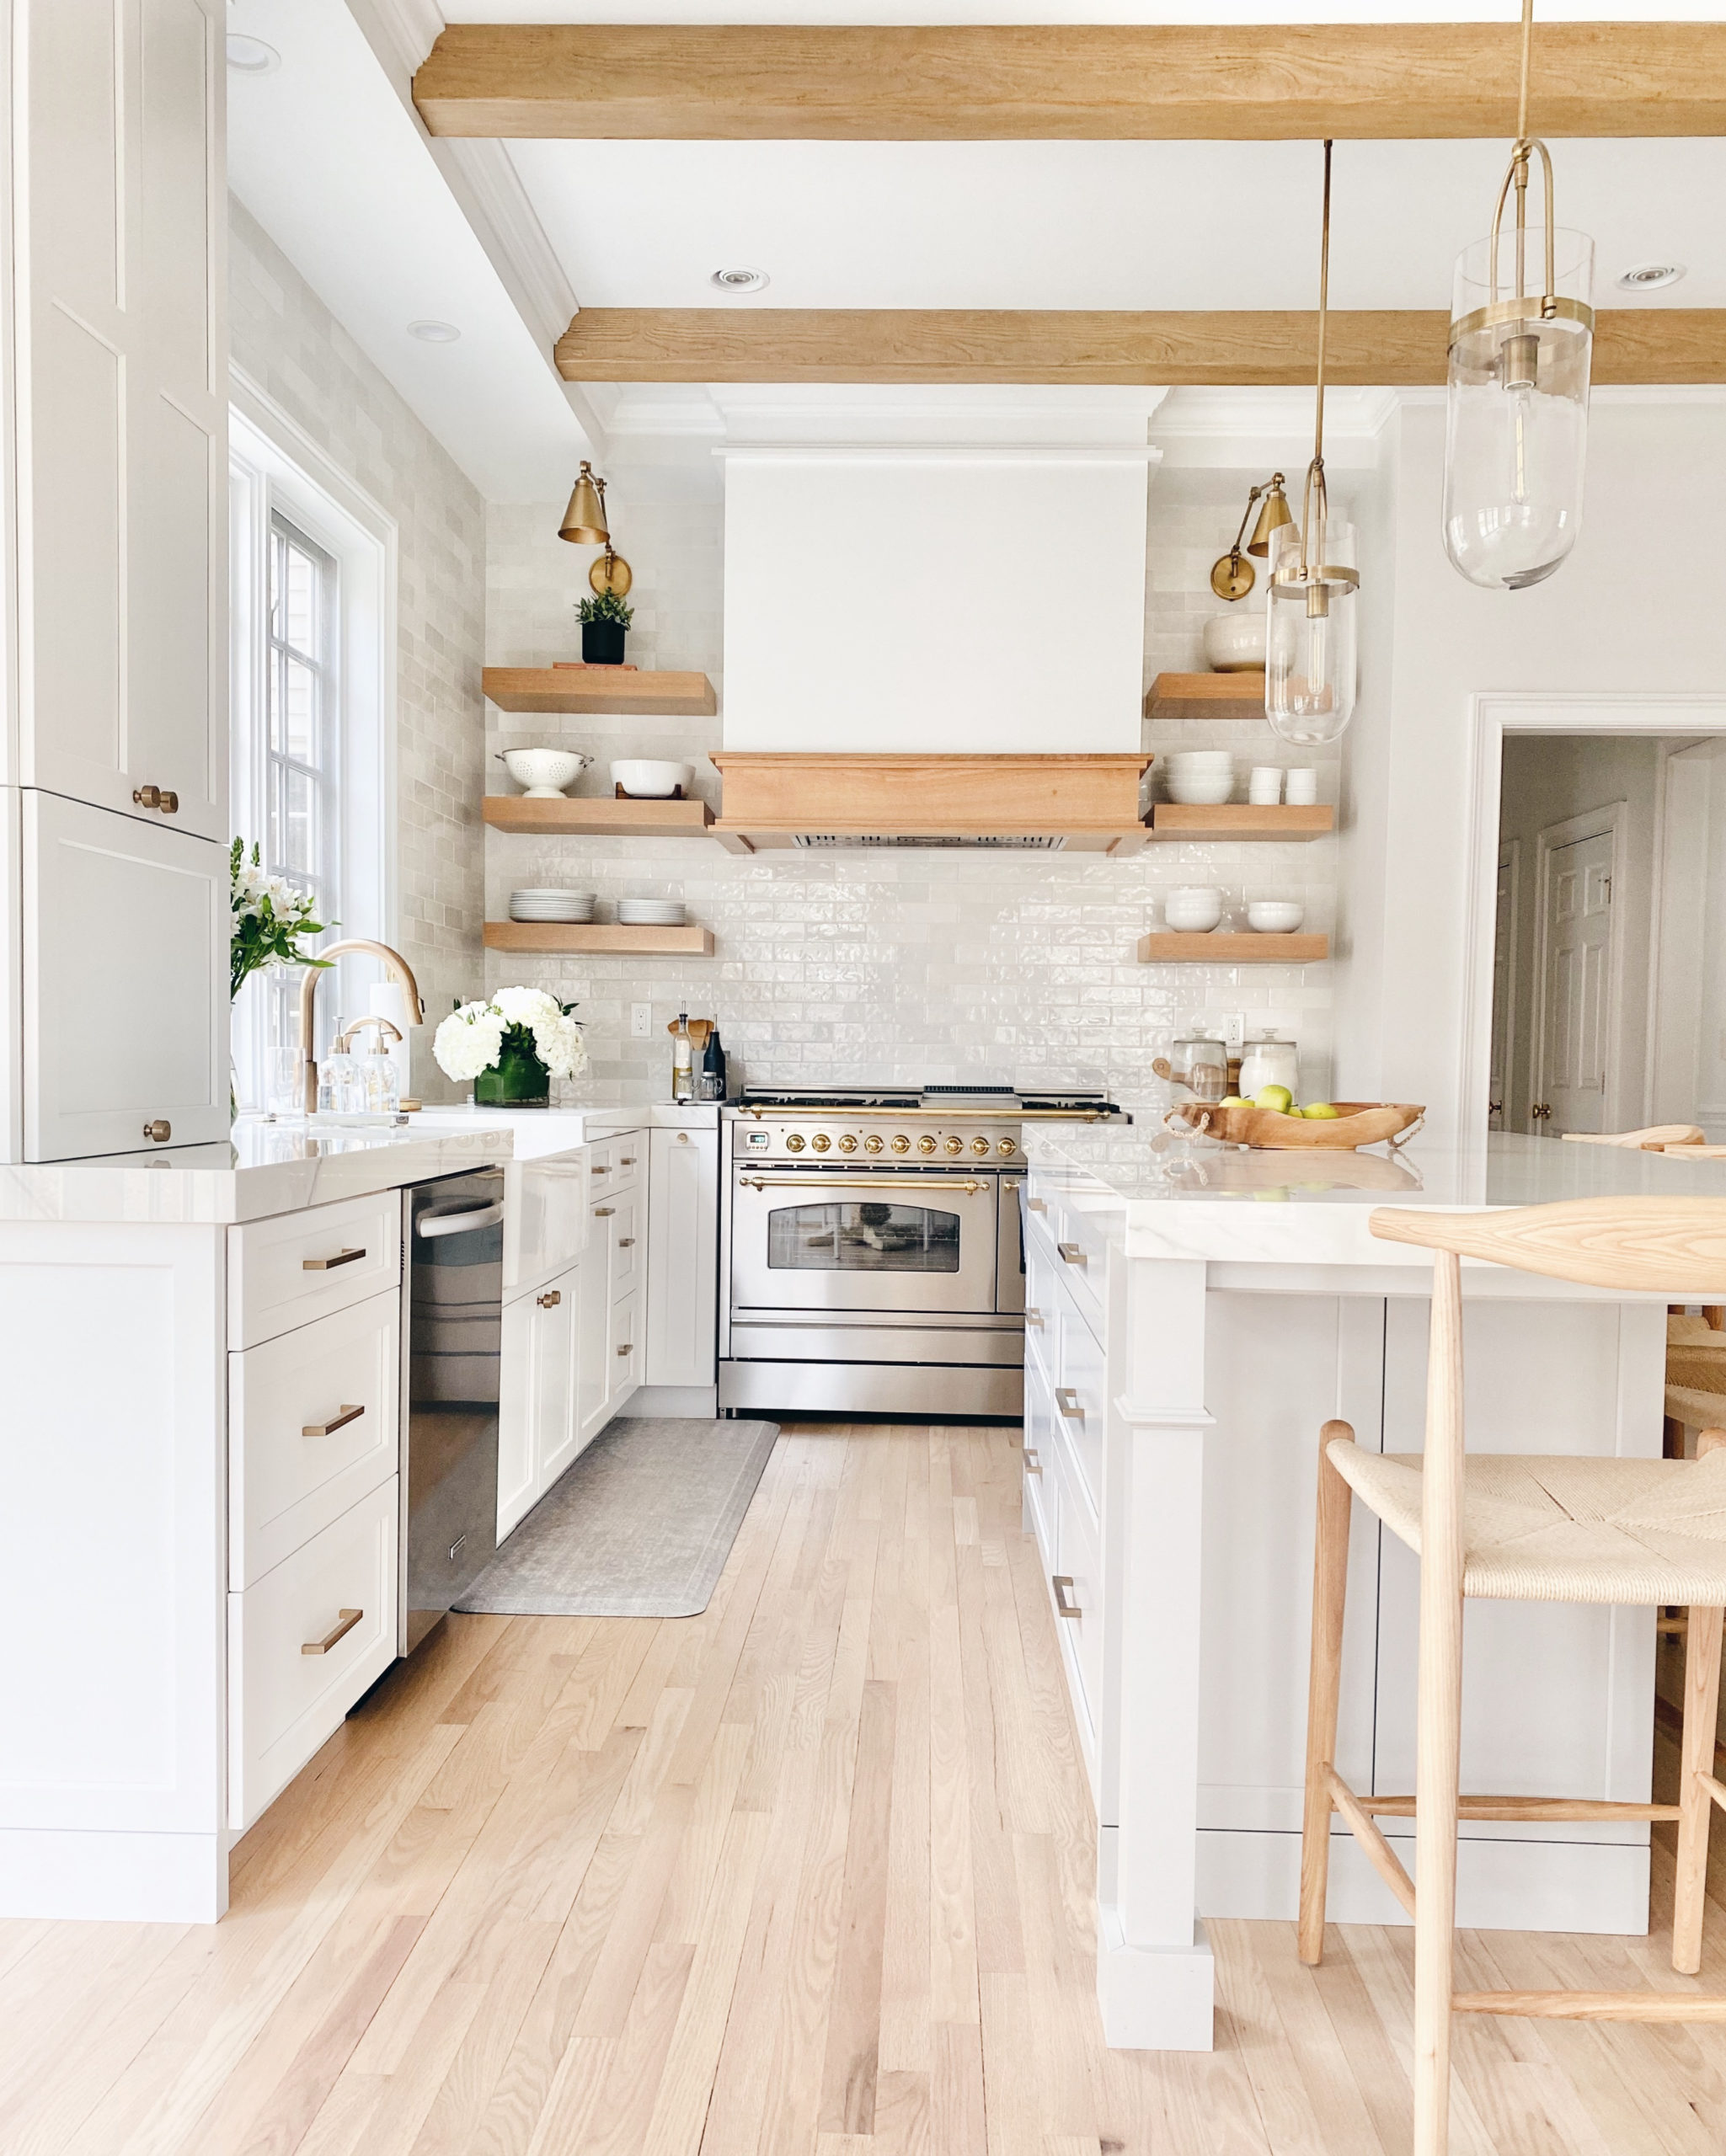 white and wood kitchen remodel reveal - pinteresting plans